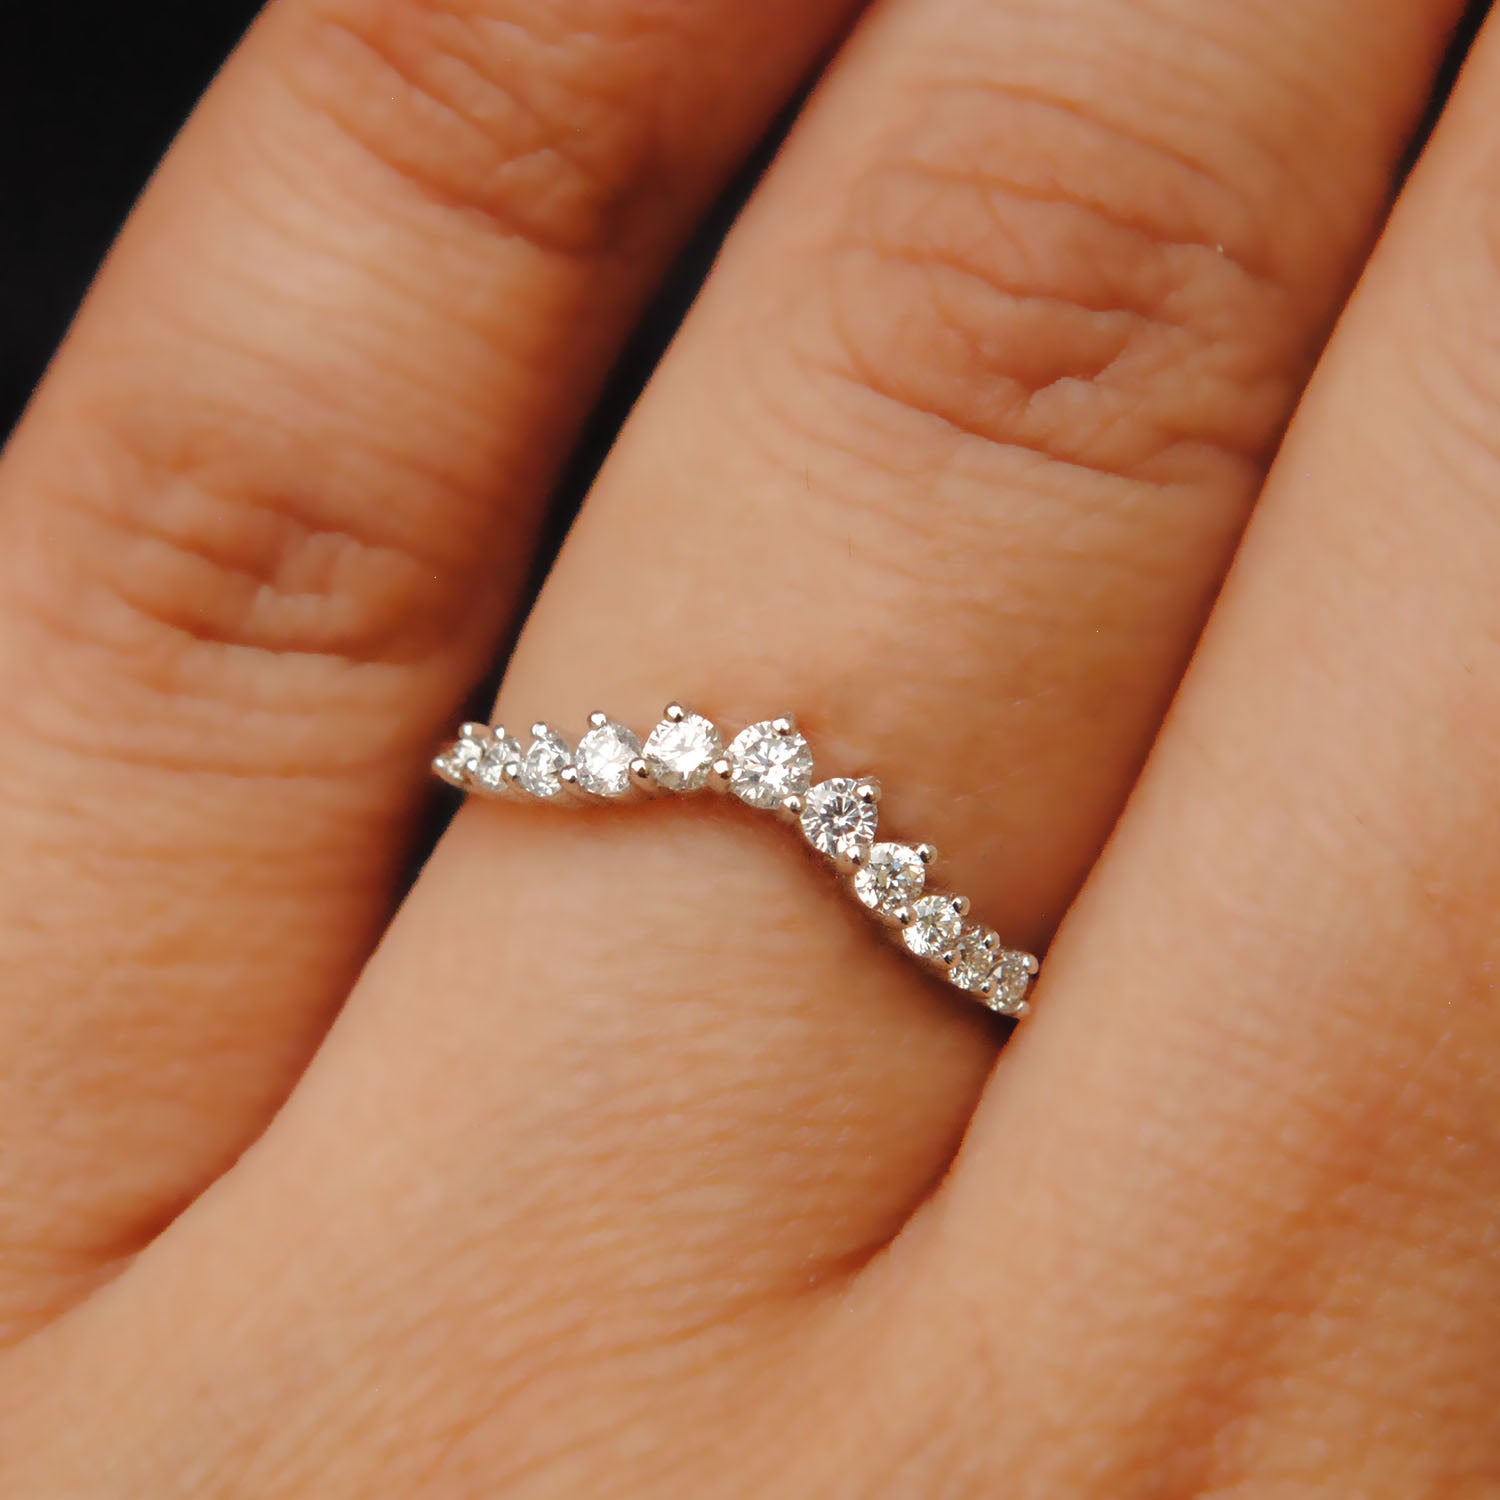 Three-Row Pave Diamond Band in 14k White Gold - Jewelry By Designs